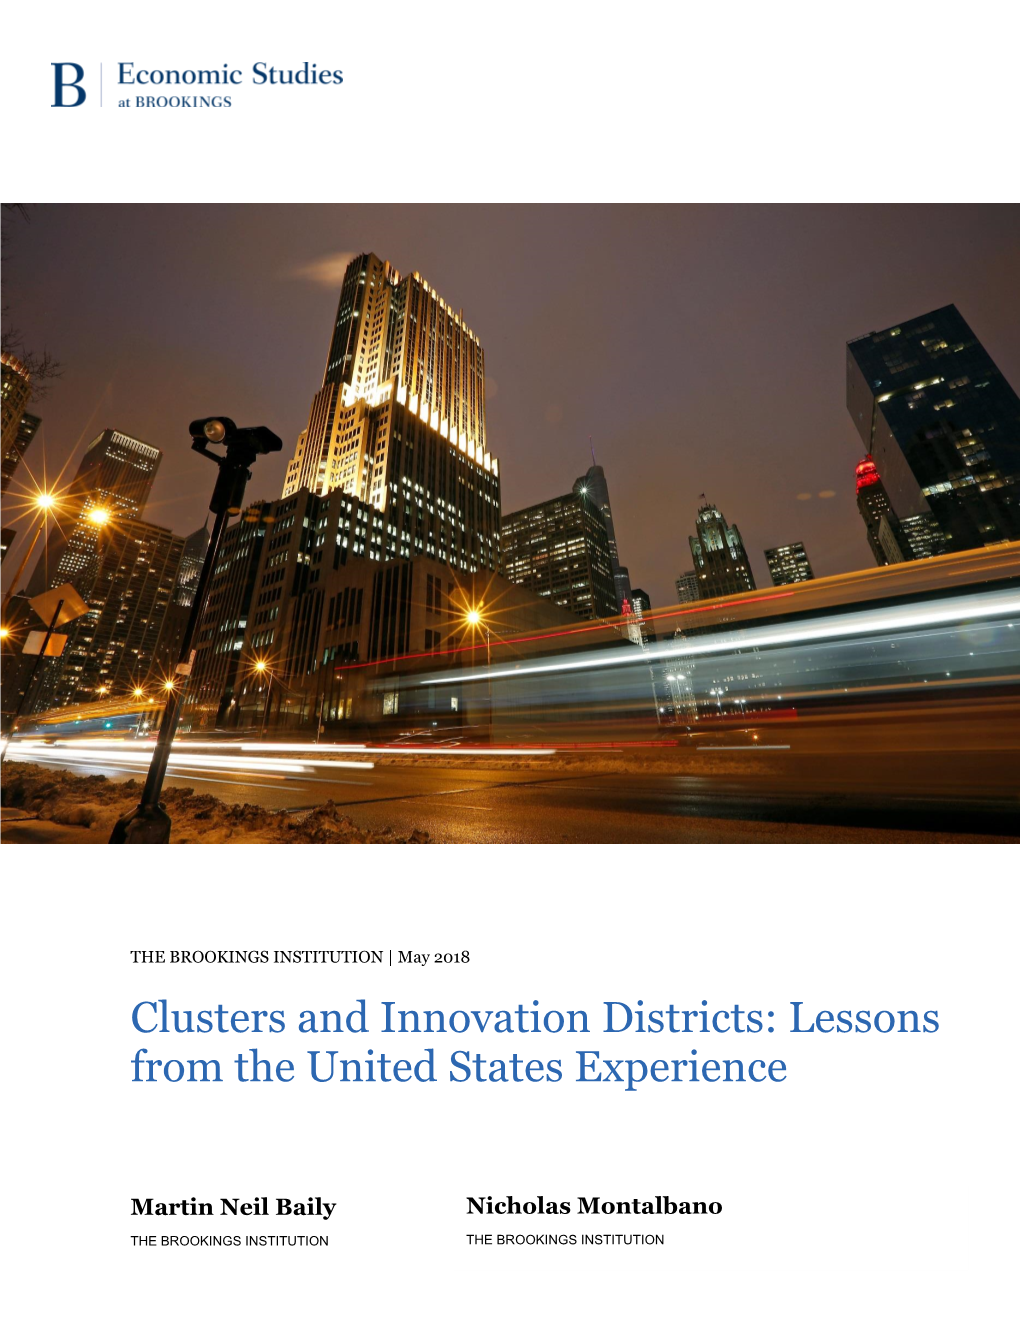 Clusters and Innovation Districts: Lessons from the United States Experience